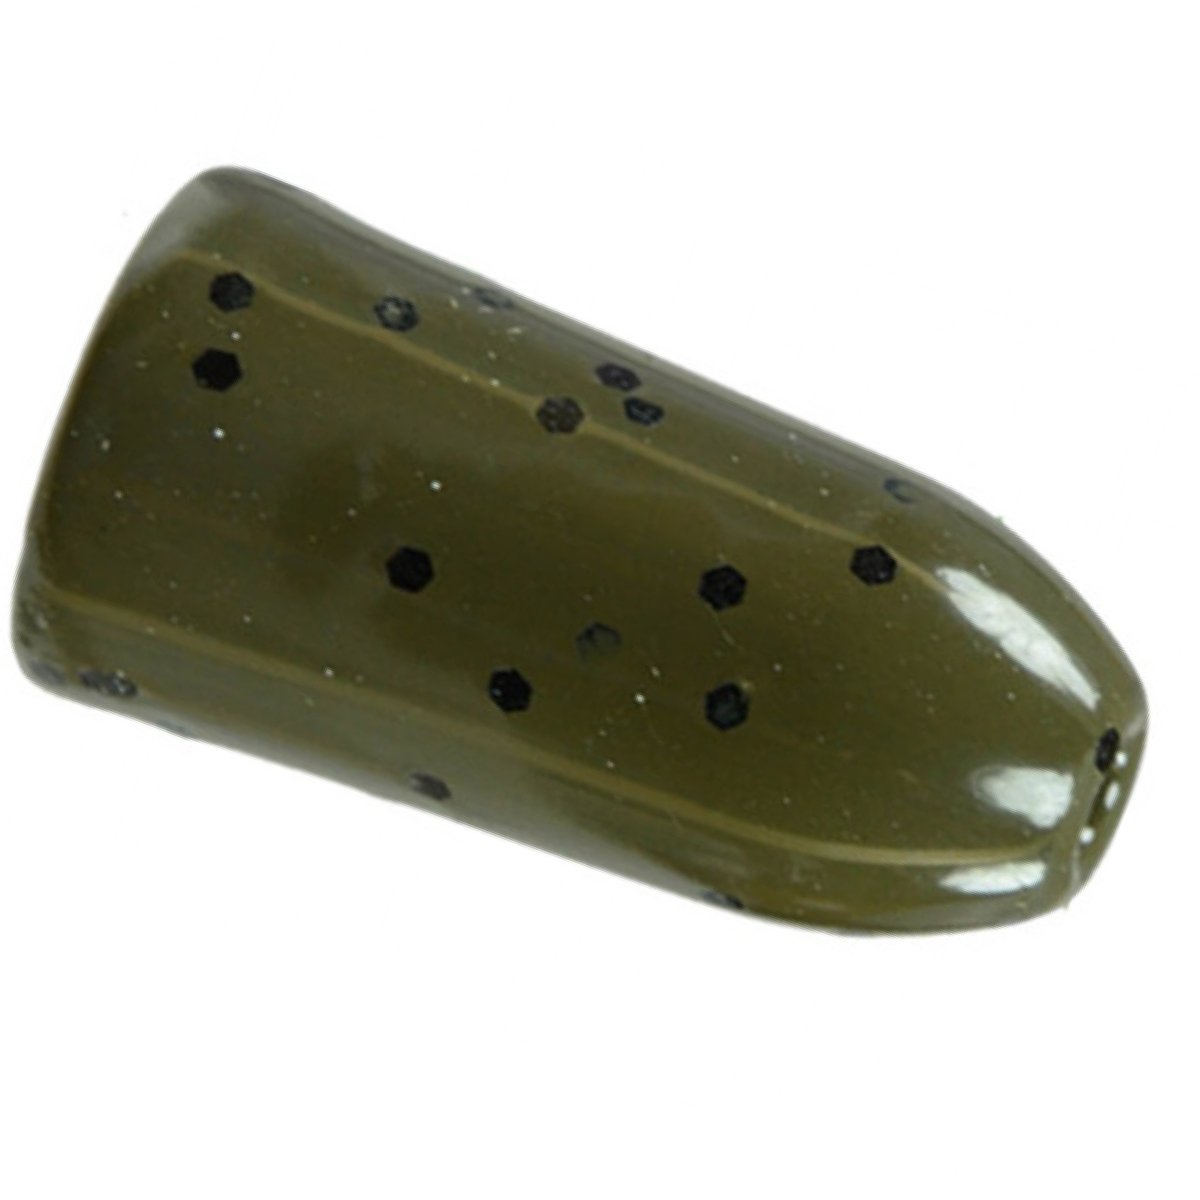 "SALE"- Reaction Tackle Tungsten Worm Weights / Bullet Sinkers in Various Sizes and Colors